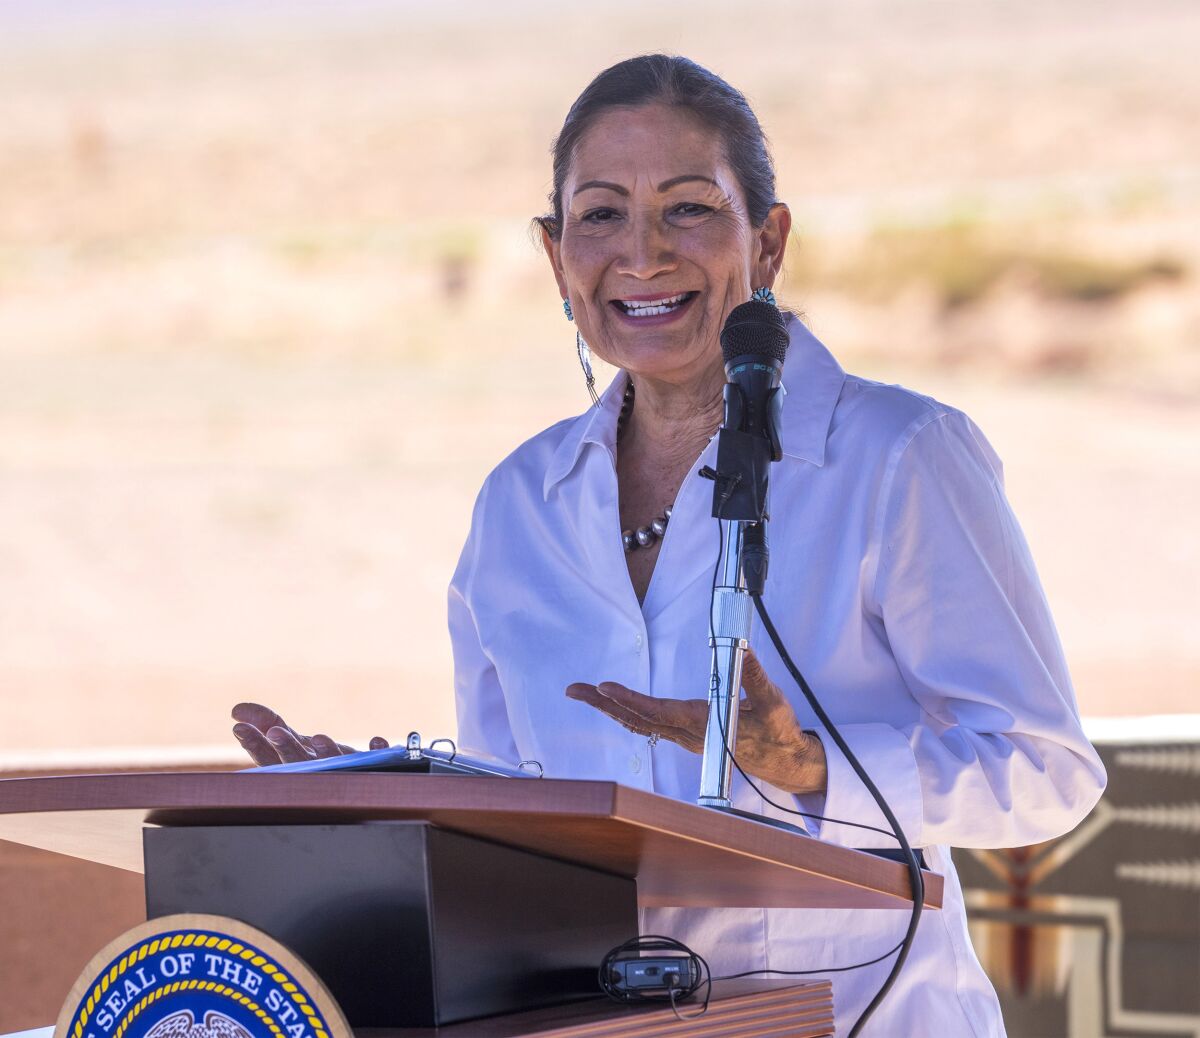 FILE - U.S. Secretary of the Interior Deb Haaland speaks after signing the agreement for the Navajo federal reserved water rights settlement at Monument Valley, Utah on Friday, May 27, 2022. Haaland has tested positive for COVID-19 on Wednesday, June 1, 2022 and has mild symptoms. The Interior Department said Haaland is isolating in Nevada where she was part of a roundtable discussion Tuesday on clean energy production on public lands. (Rick Egan/The Salt Lake Tribune via AP, File)